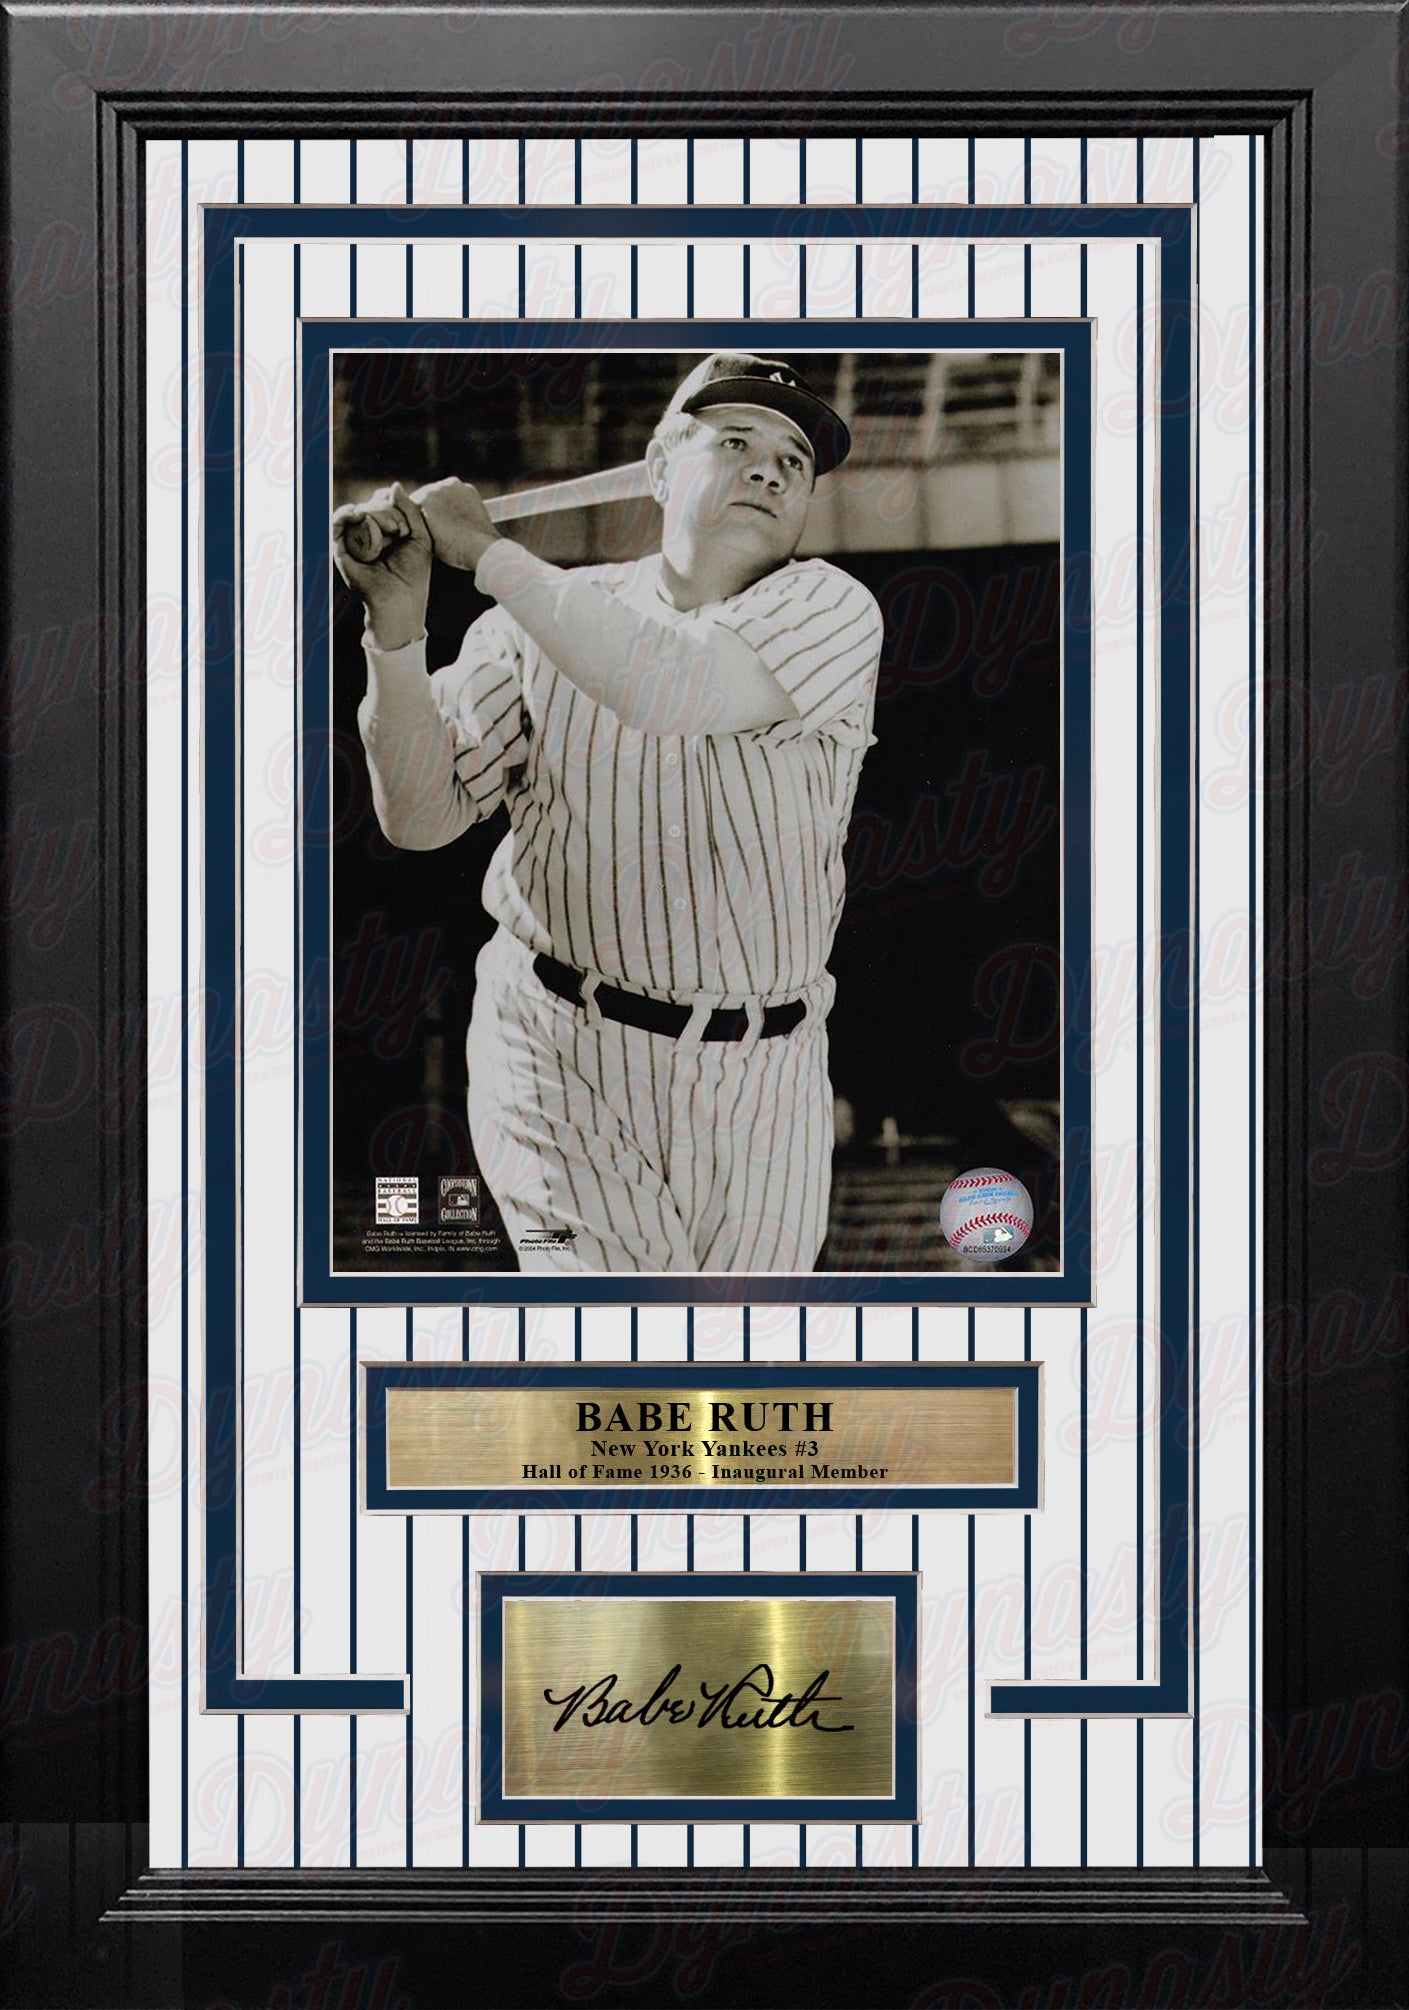 Babe Ruth in Action New York Yankees 8" x 10" Framed Baseball Photo with Engraved Autograph - Dynasty Sports & Framing 